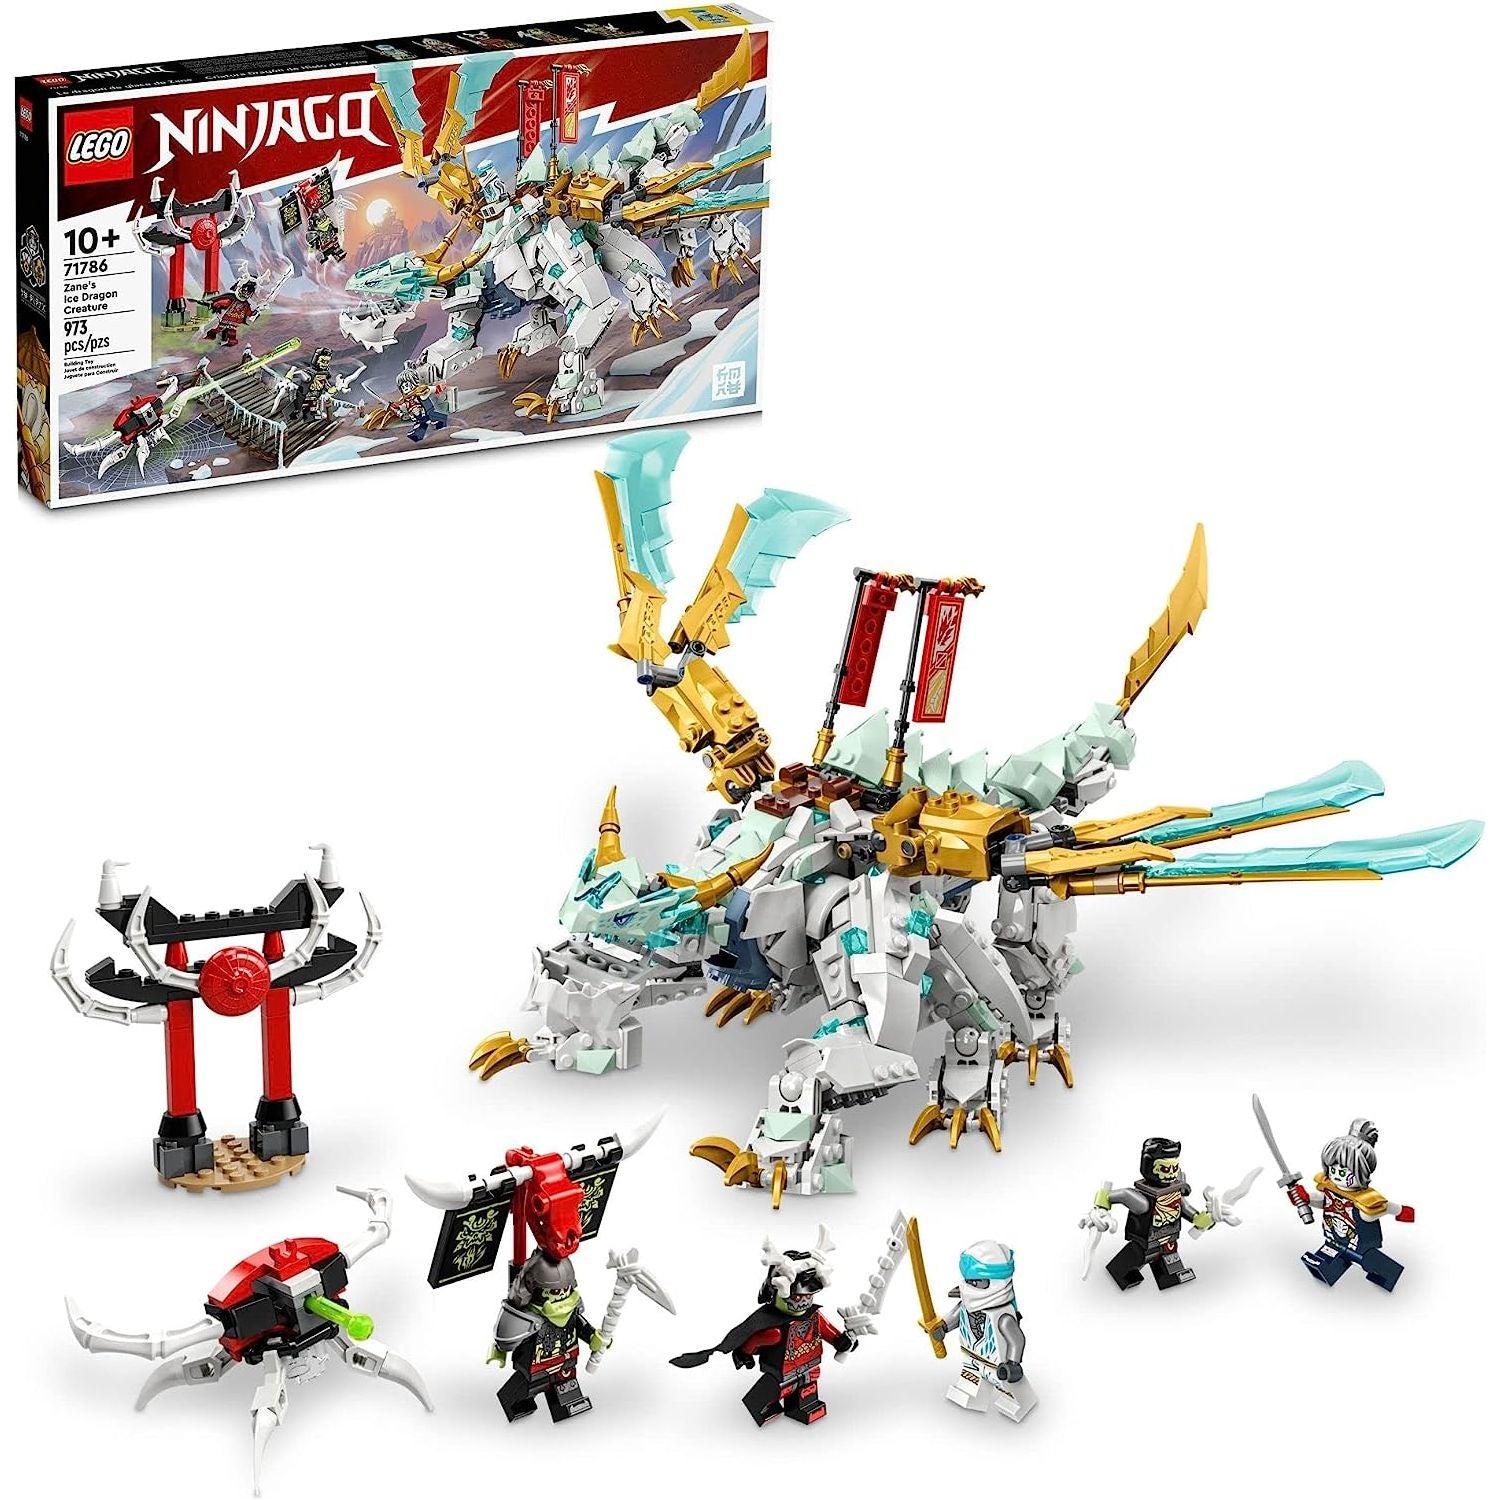 EGO NINJAGO Zane’s Ice Dragon Creature 71786, 2in1 Dragon Toy to Action Figure Warrior, Model Building Kit, Construction Set for Kids with 5 Minifigures